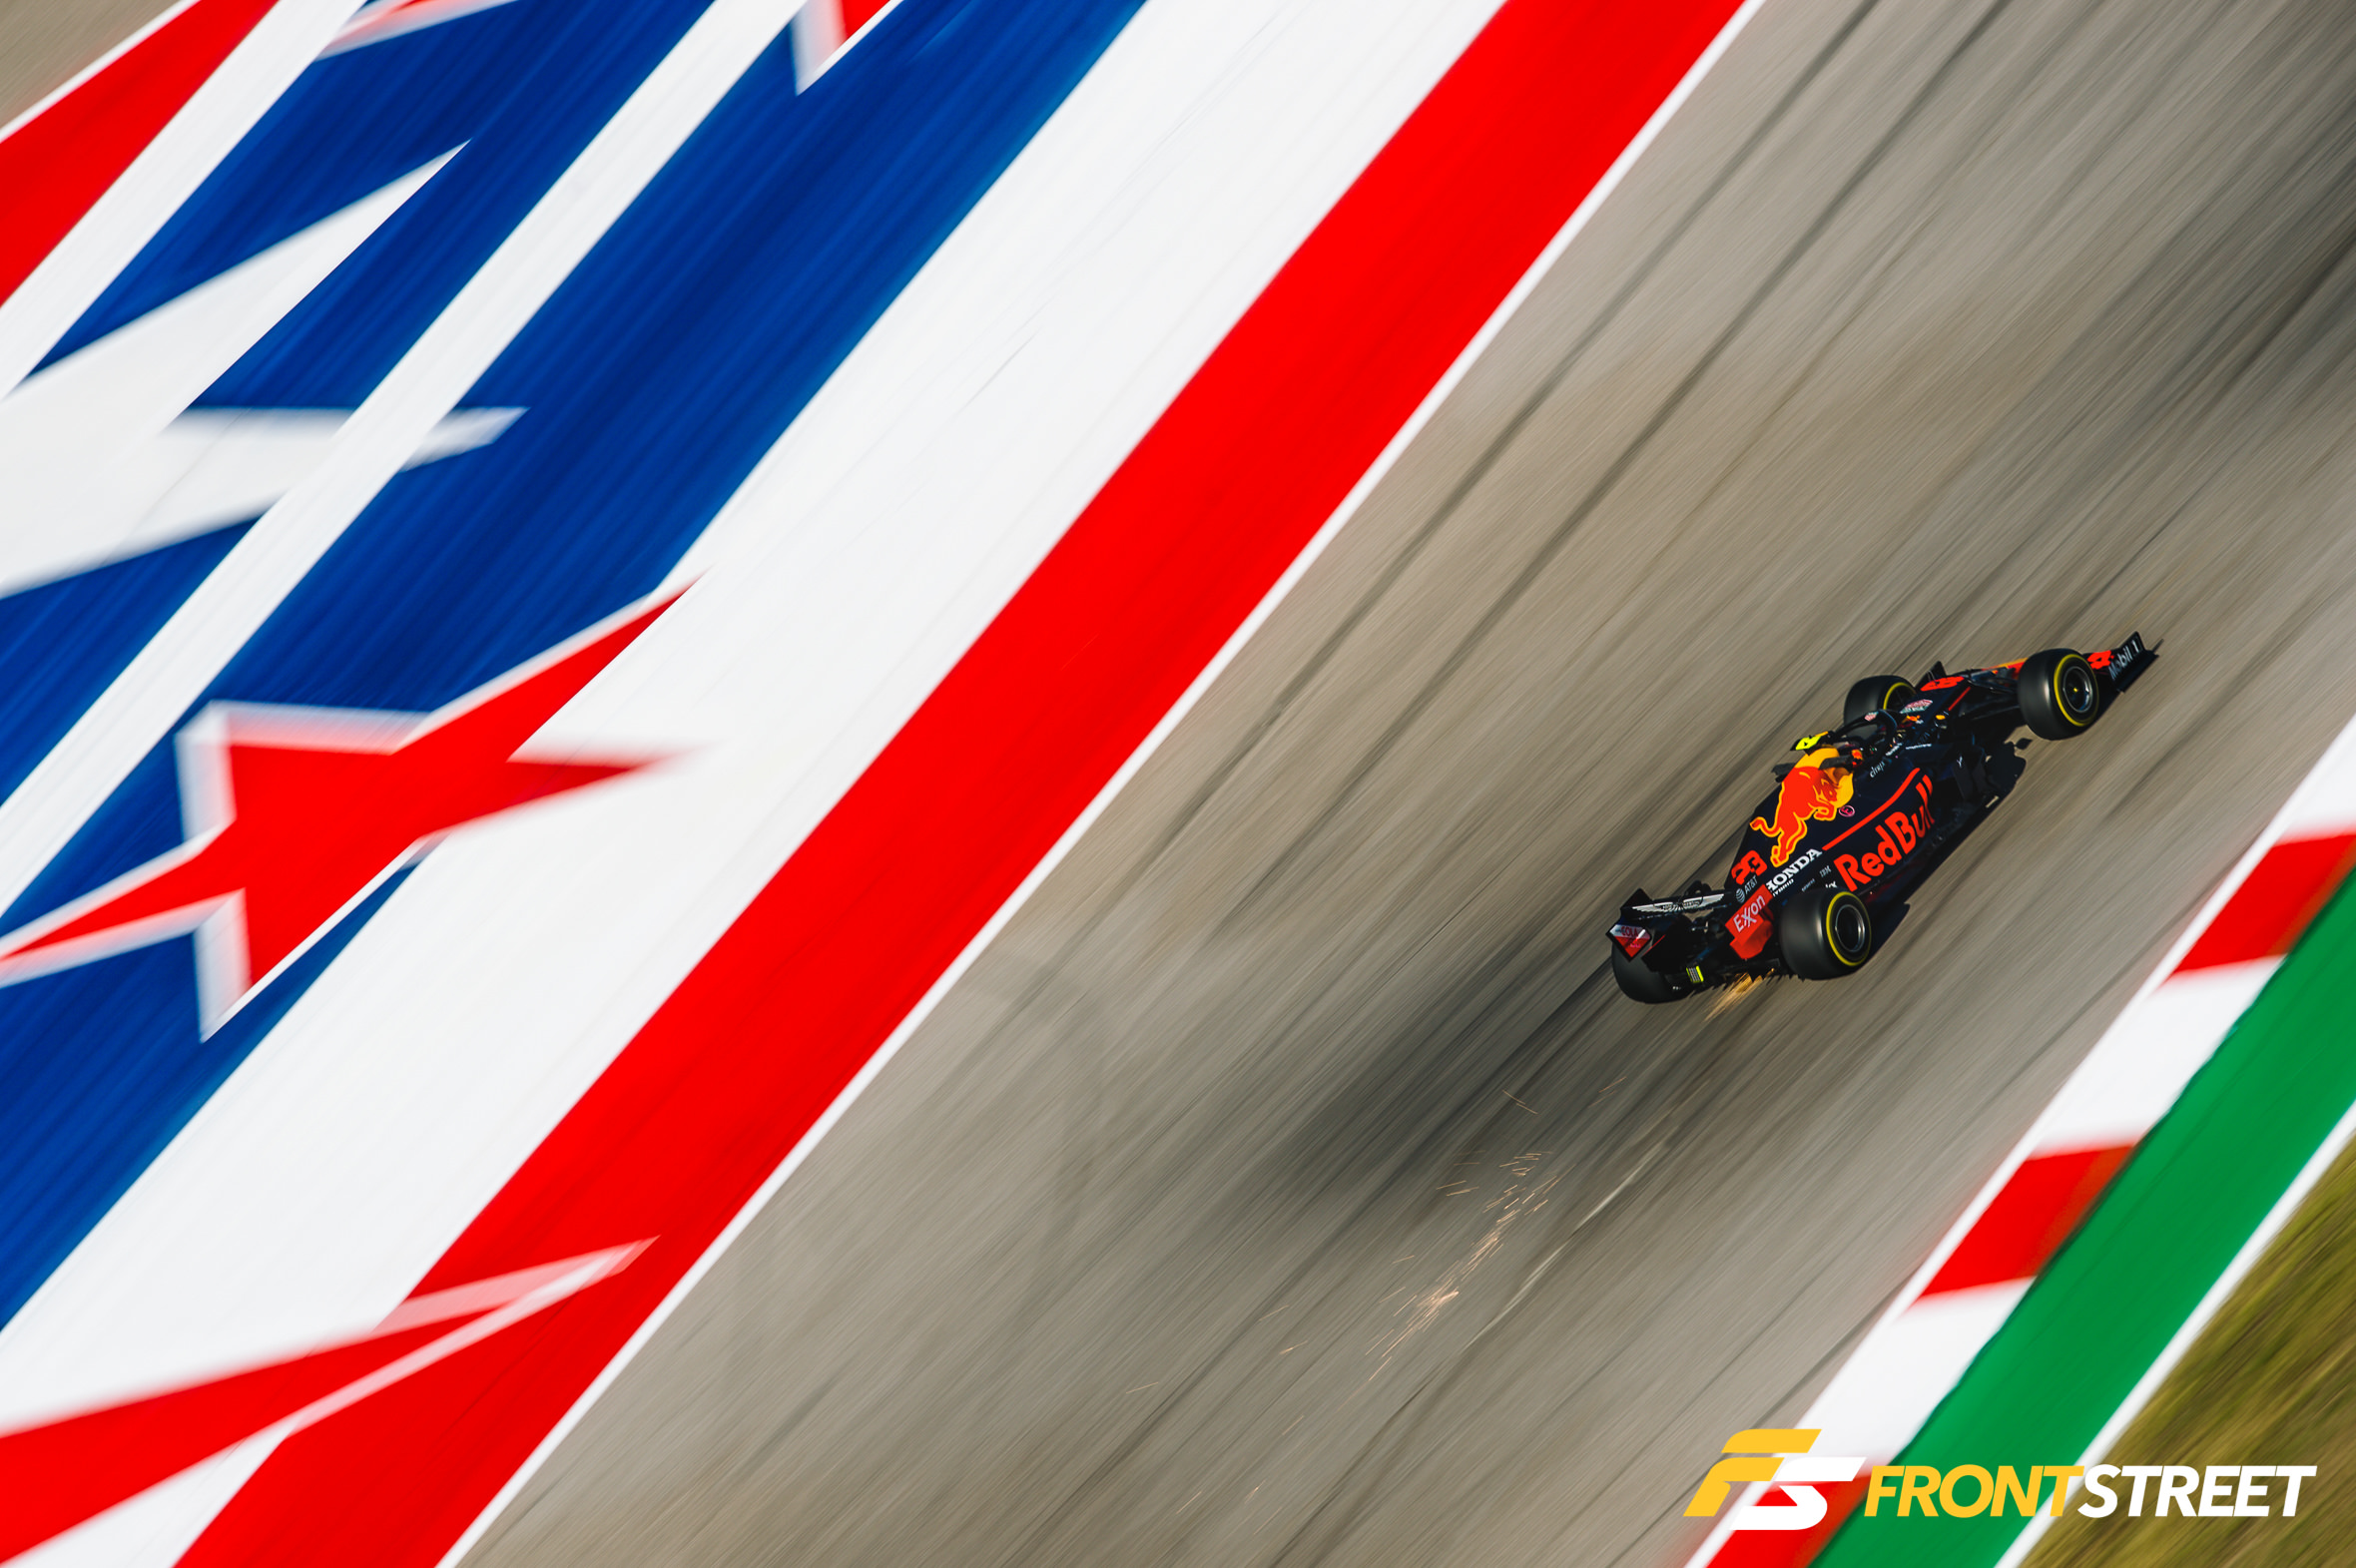 How To Photograph: The 2019 Formula 1 United States Grand Prix